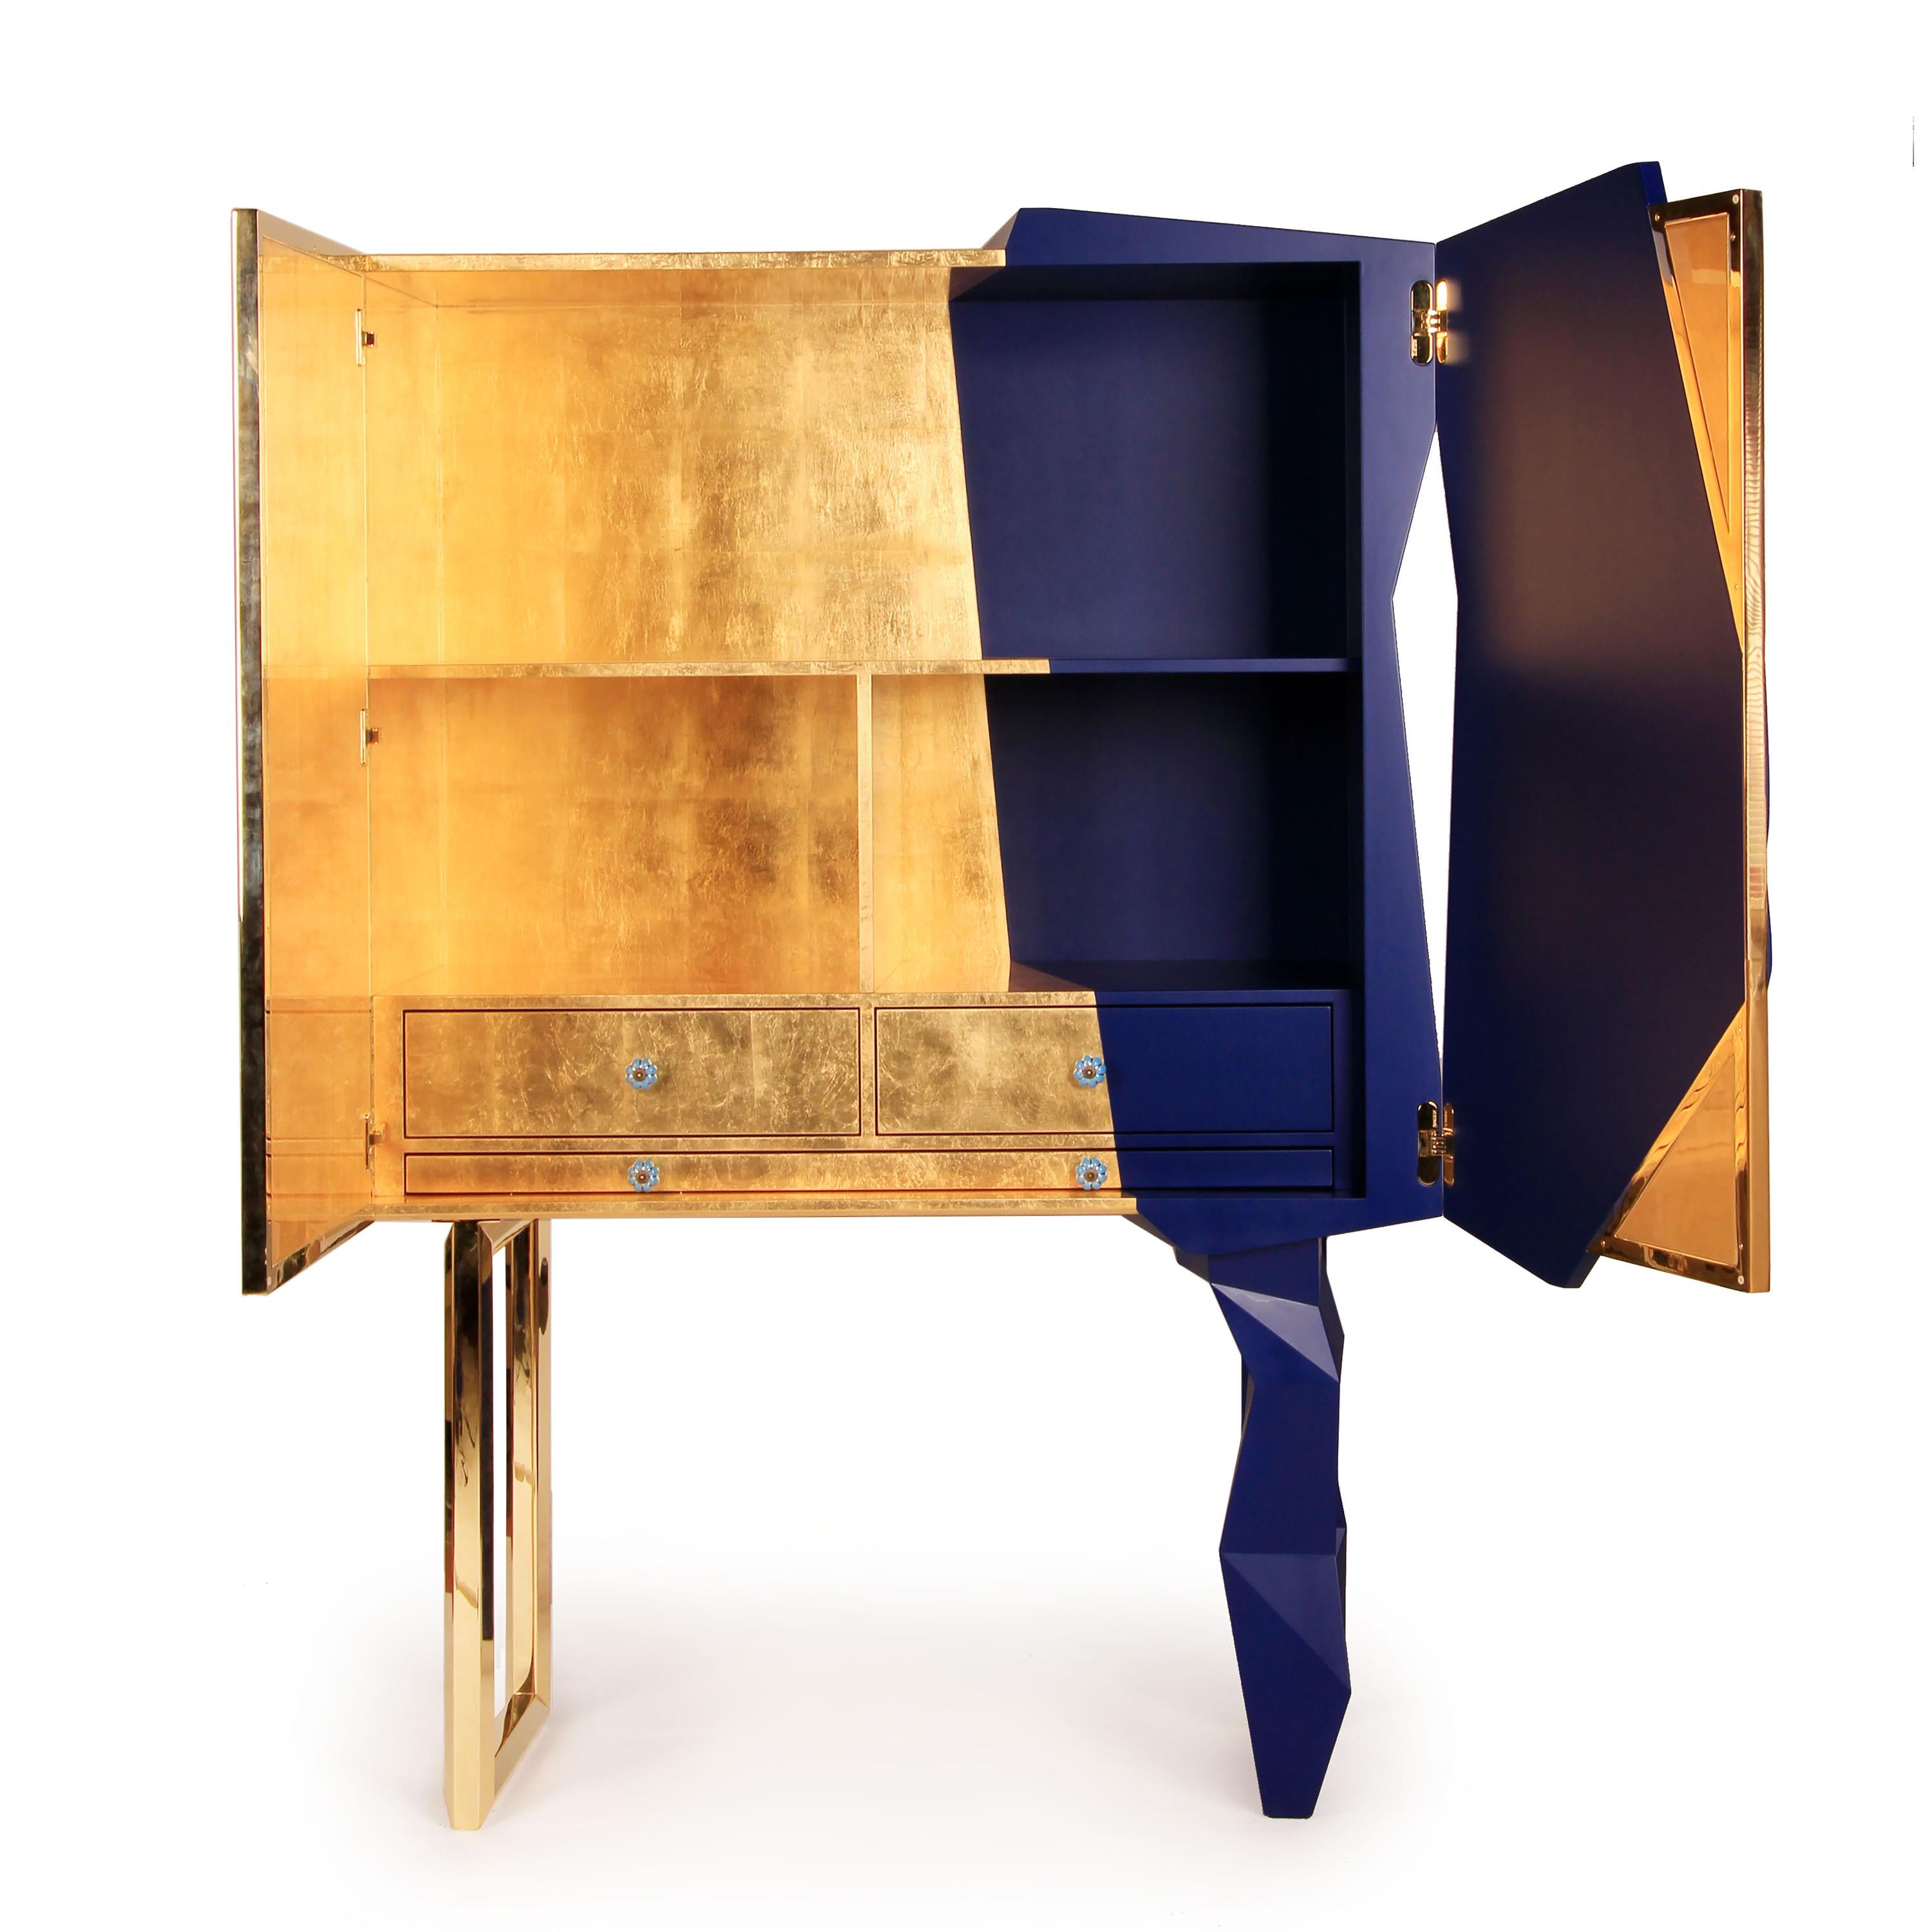 Honeycomb blue and gold leaf cabinet - Royal Stranger
Dimensions: 185 x 126 x 60 cm
Materials: Black pearl color combination with gold leaf and stainless steel coated in brass.

Inspired by one of the most intrinsic forms of nature, this